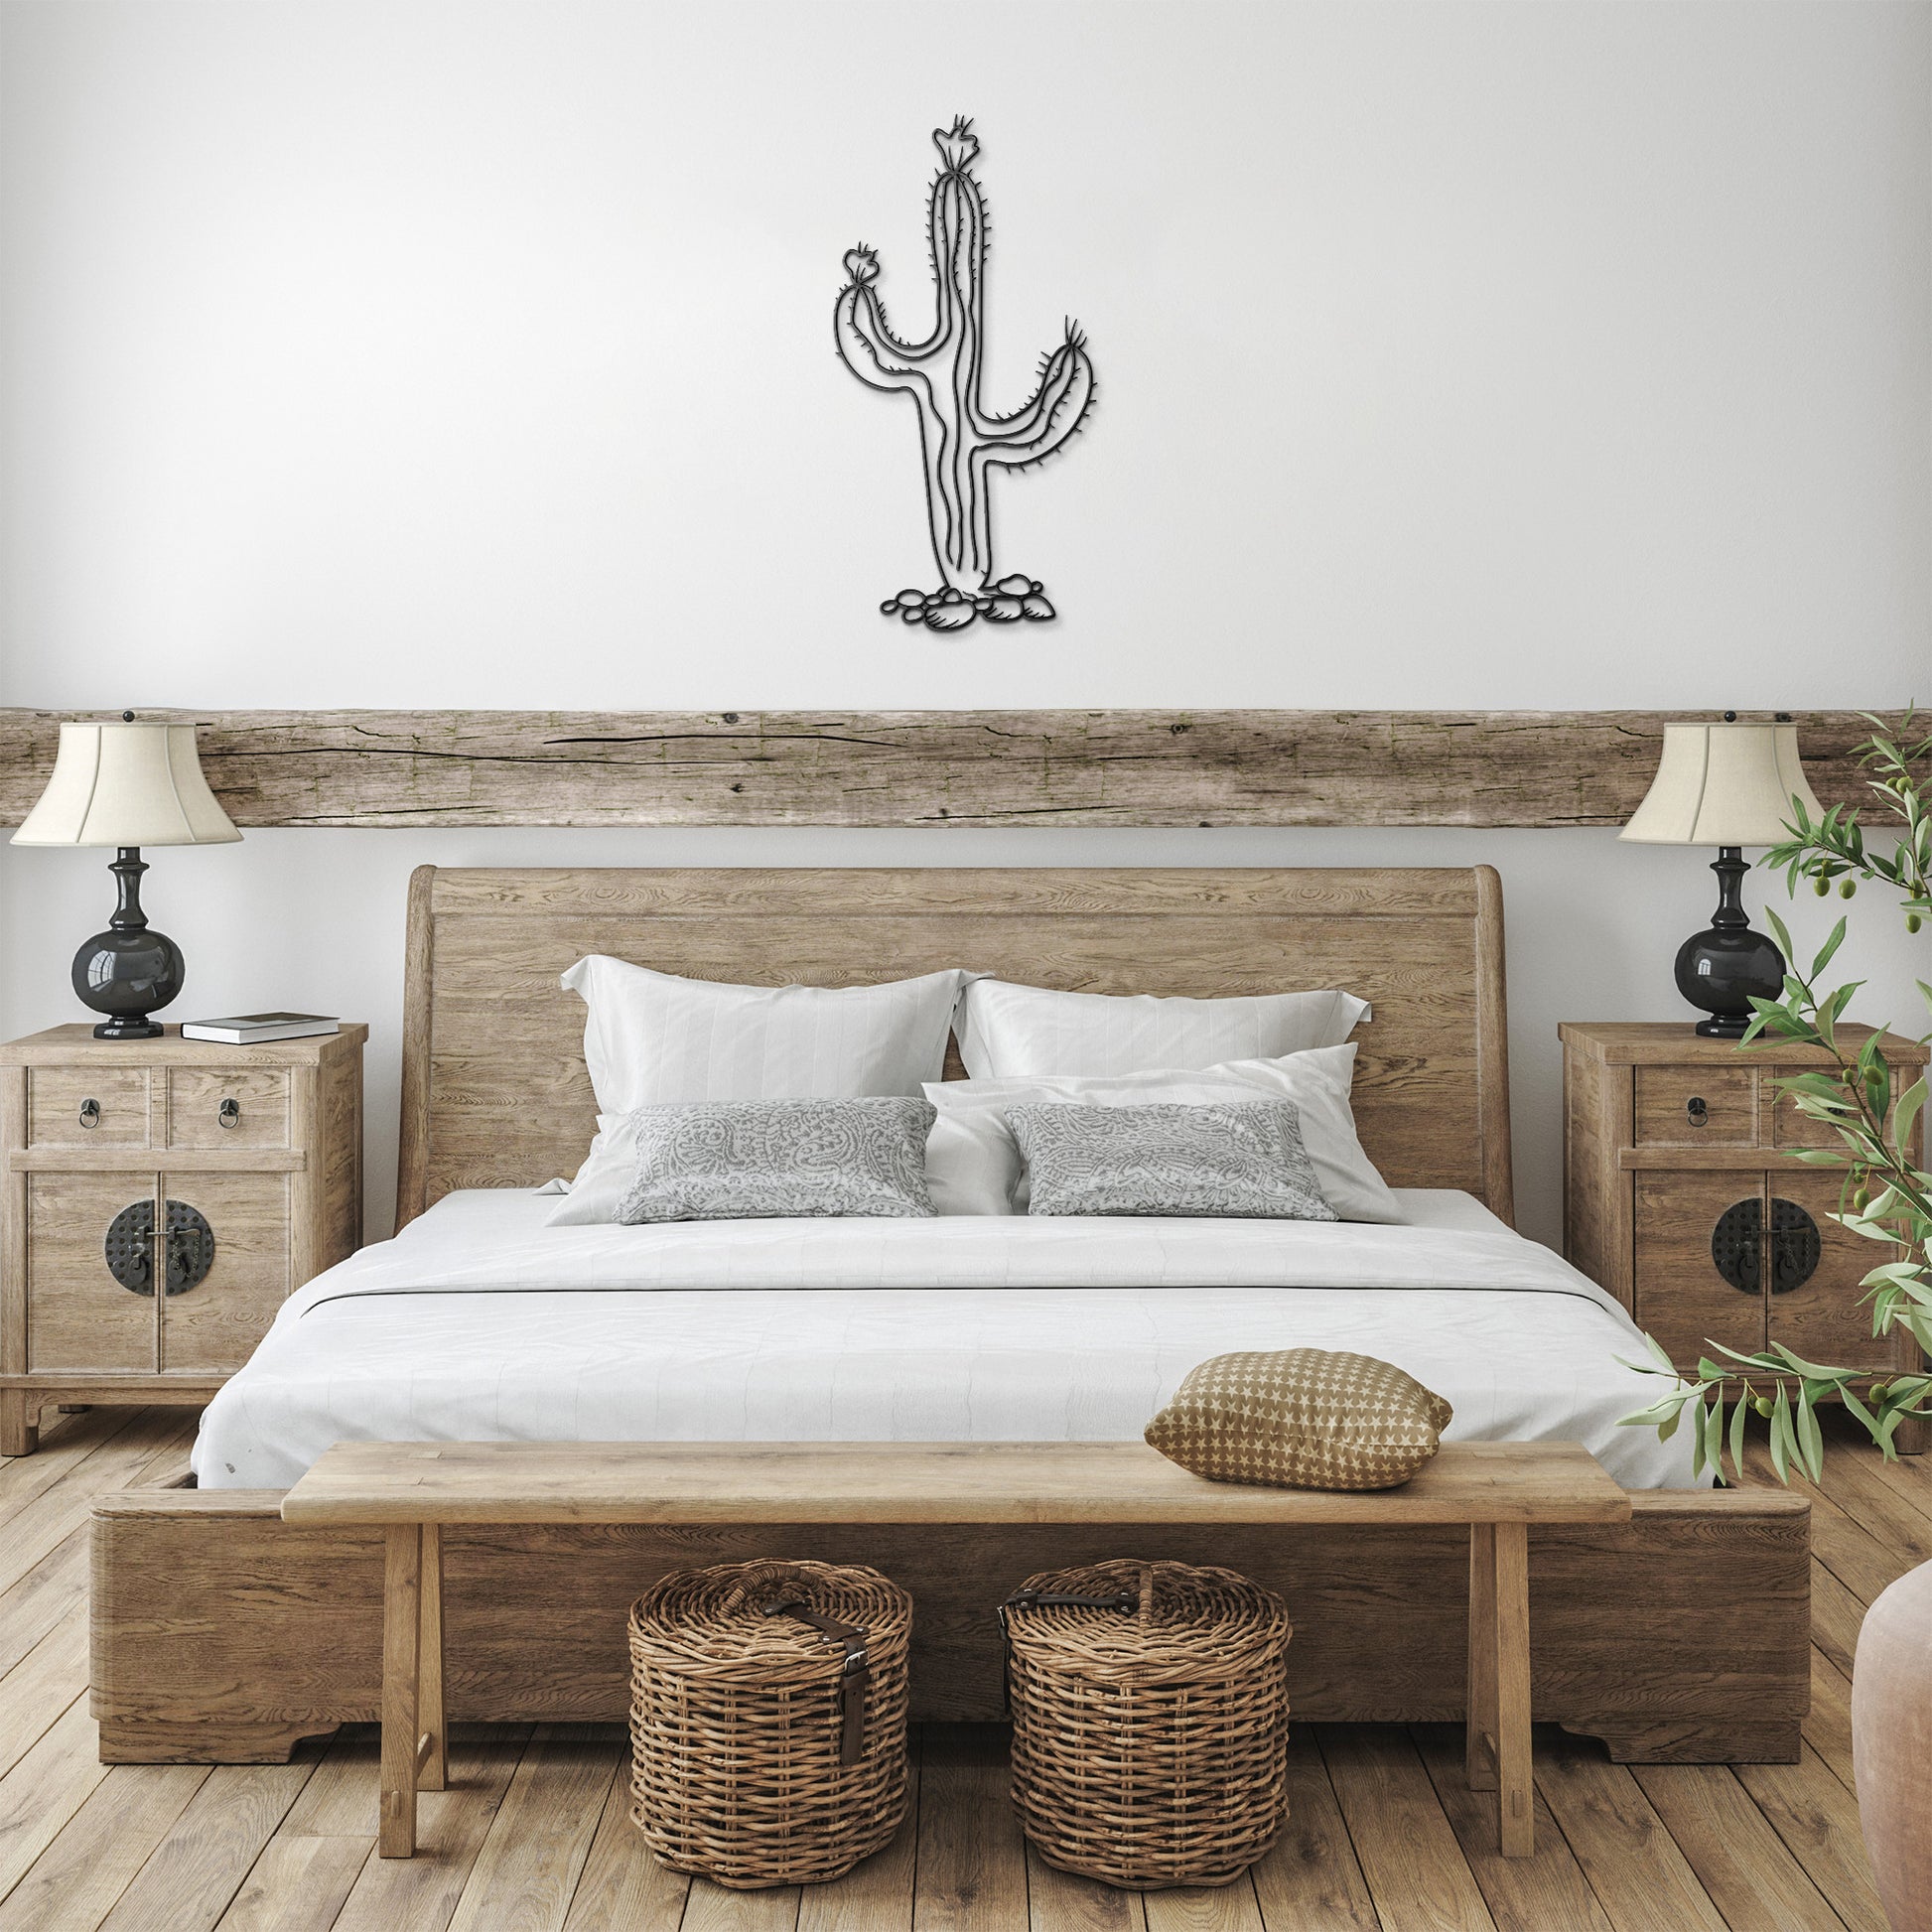 Variety of steel cactus wall art finishes in modern home decor.